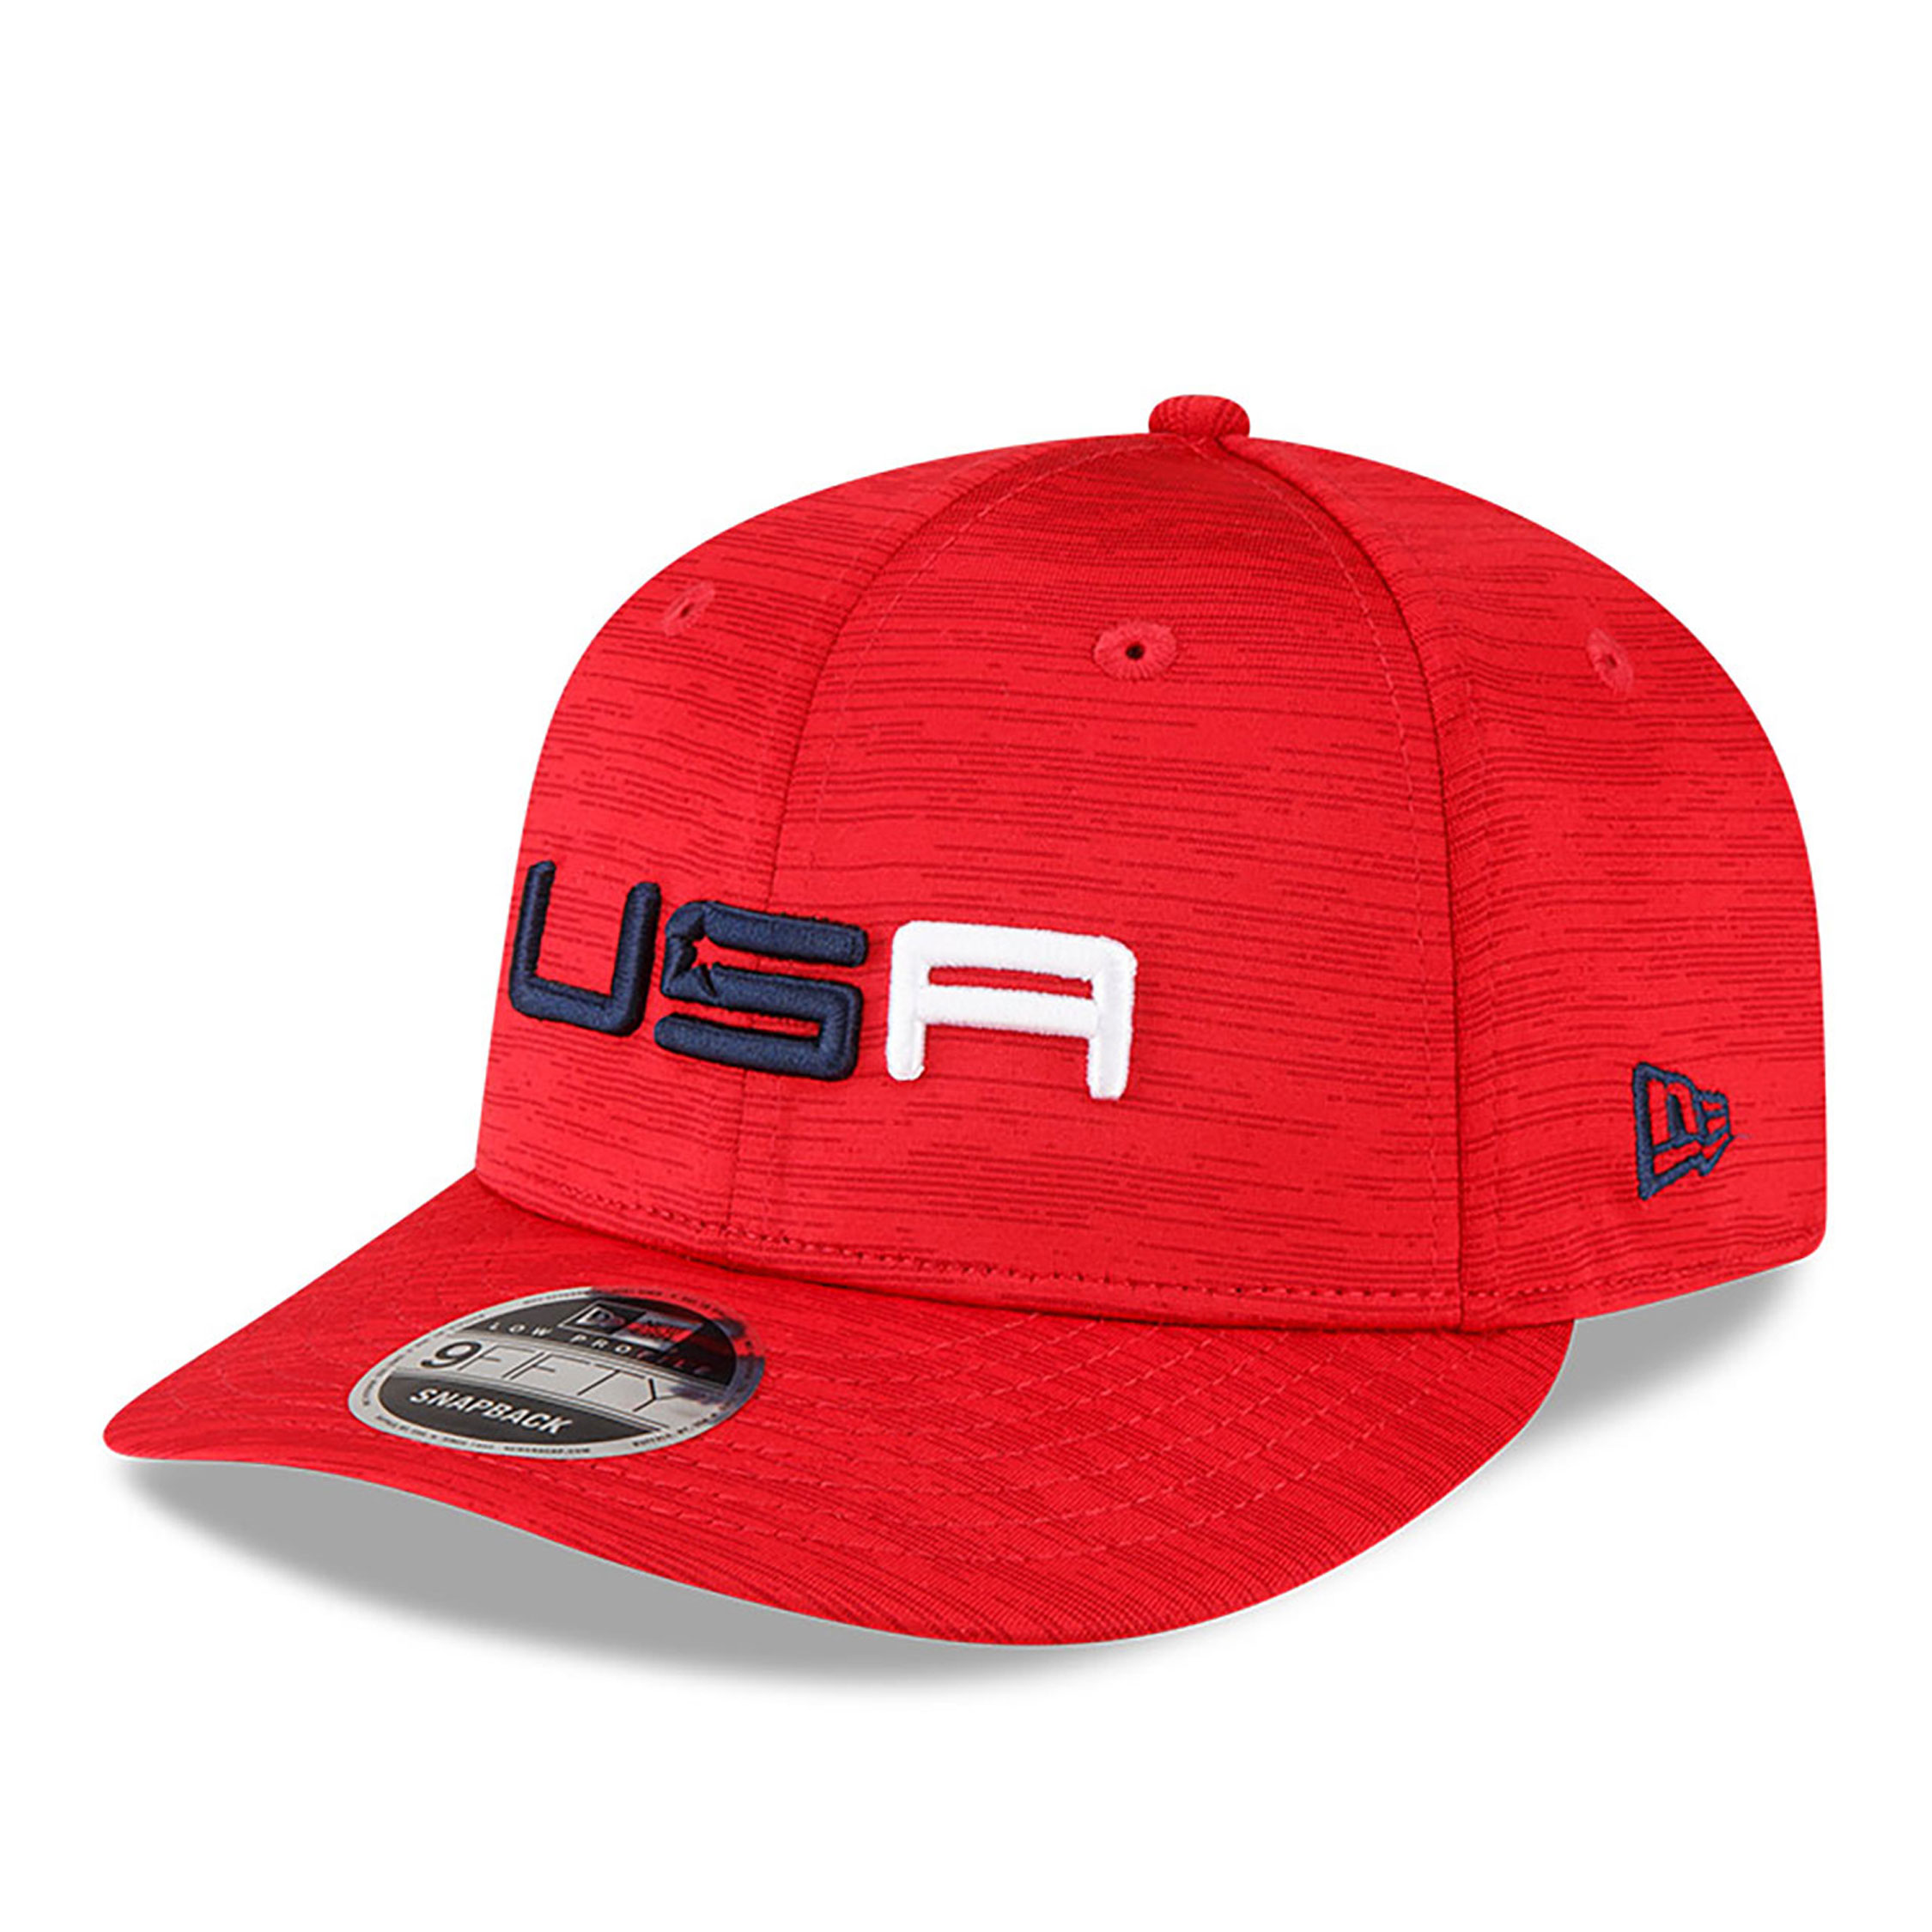 Ryder Cup USA 2023 Red 9FIFTY Low Profile Cap